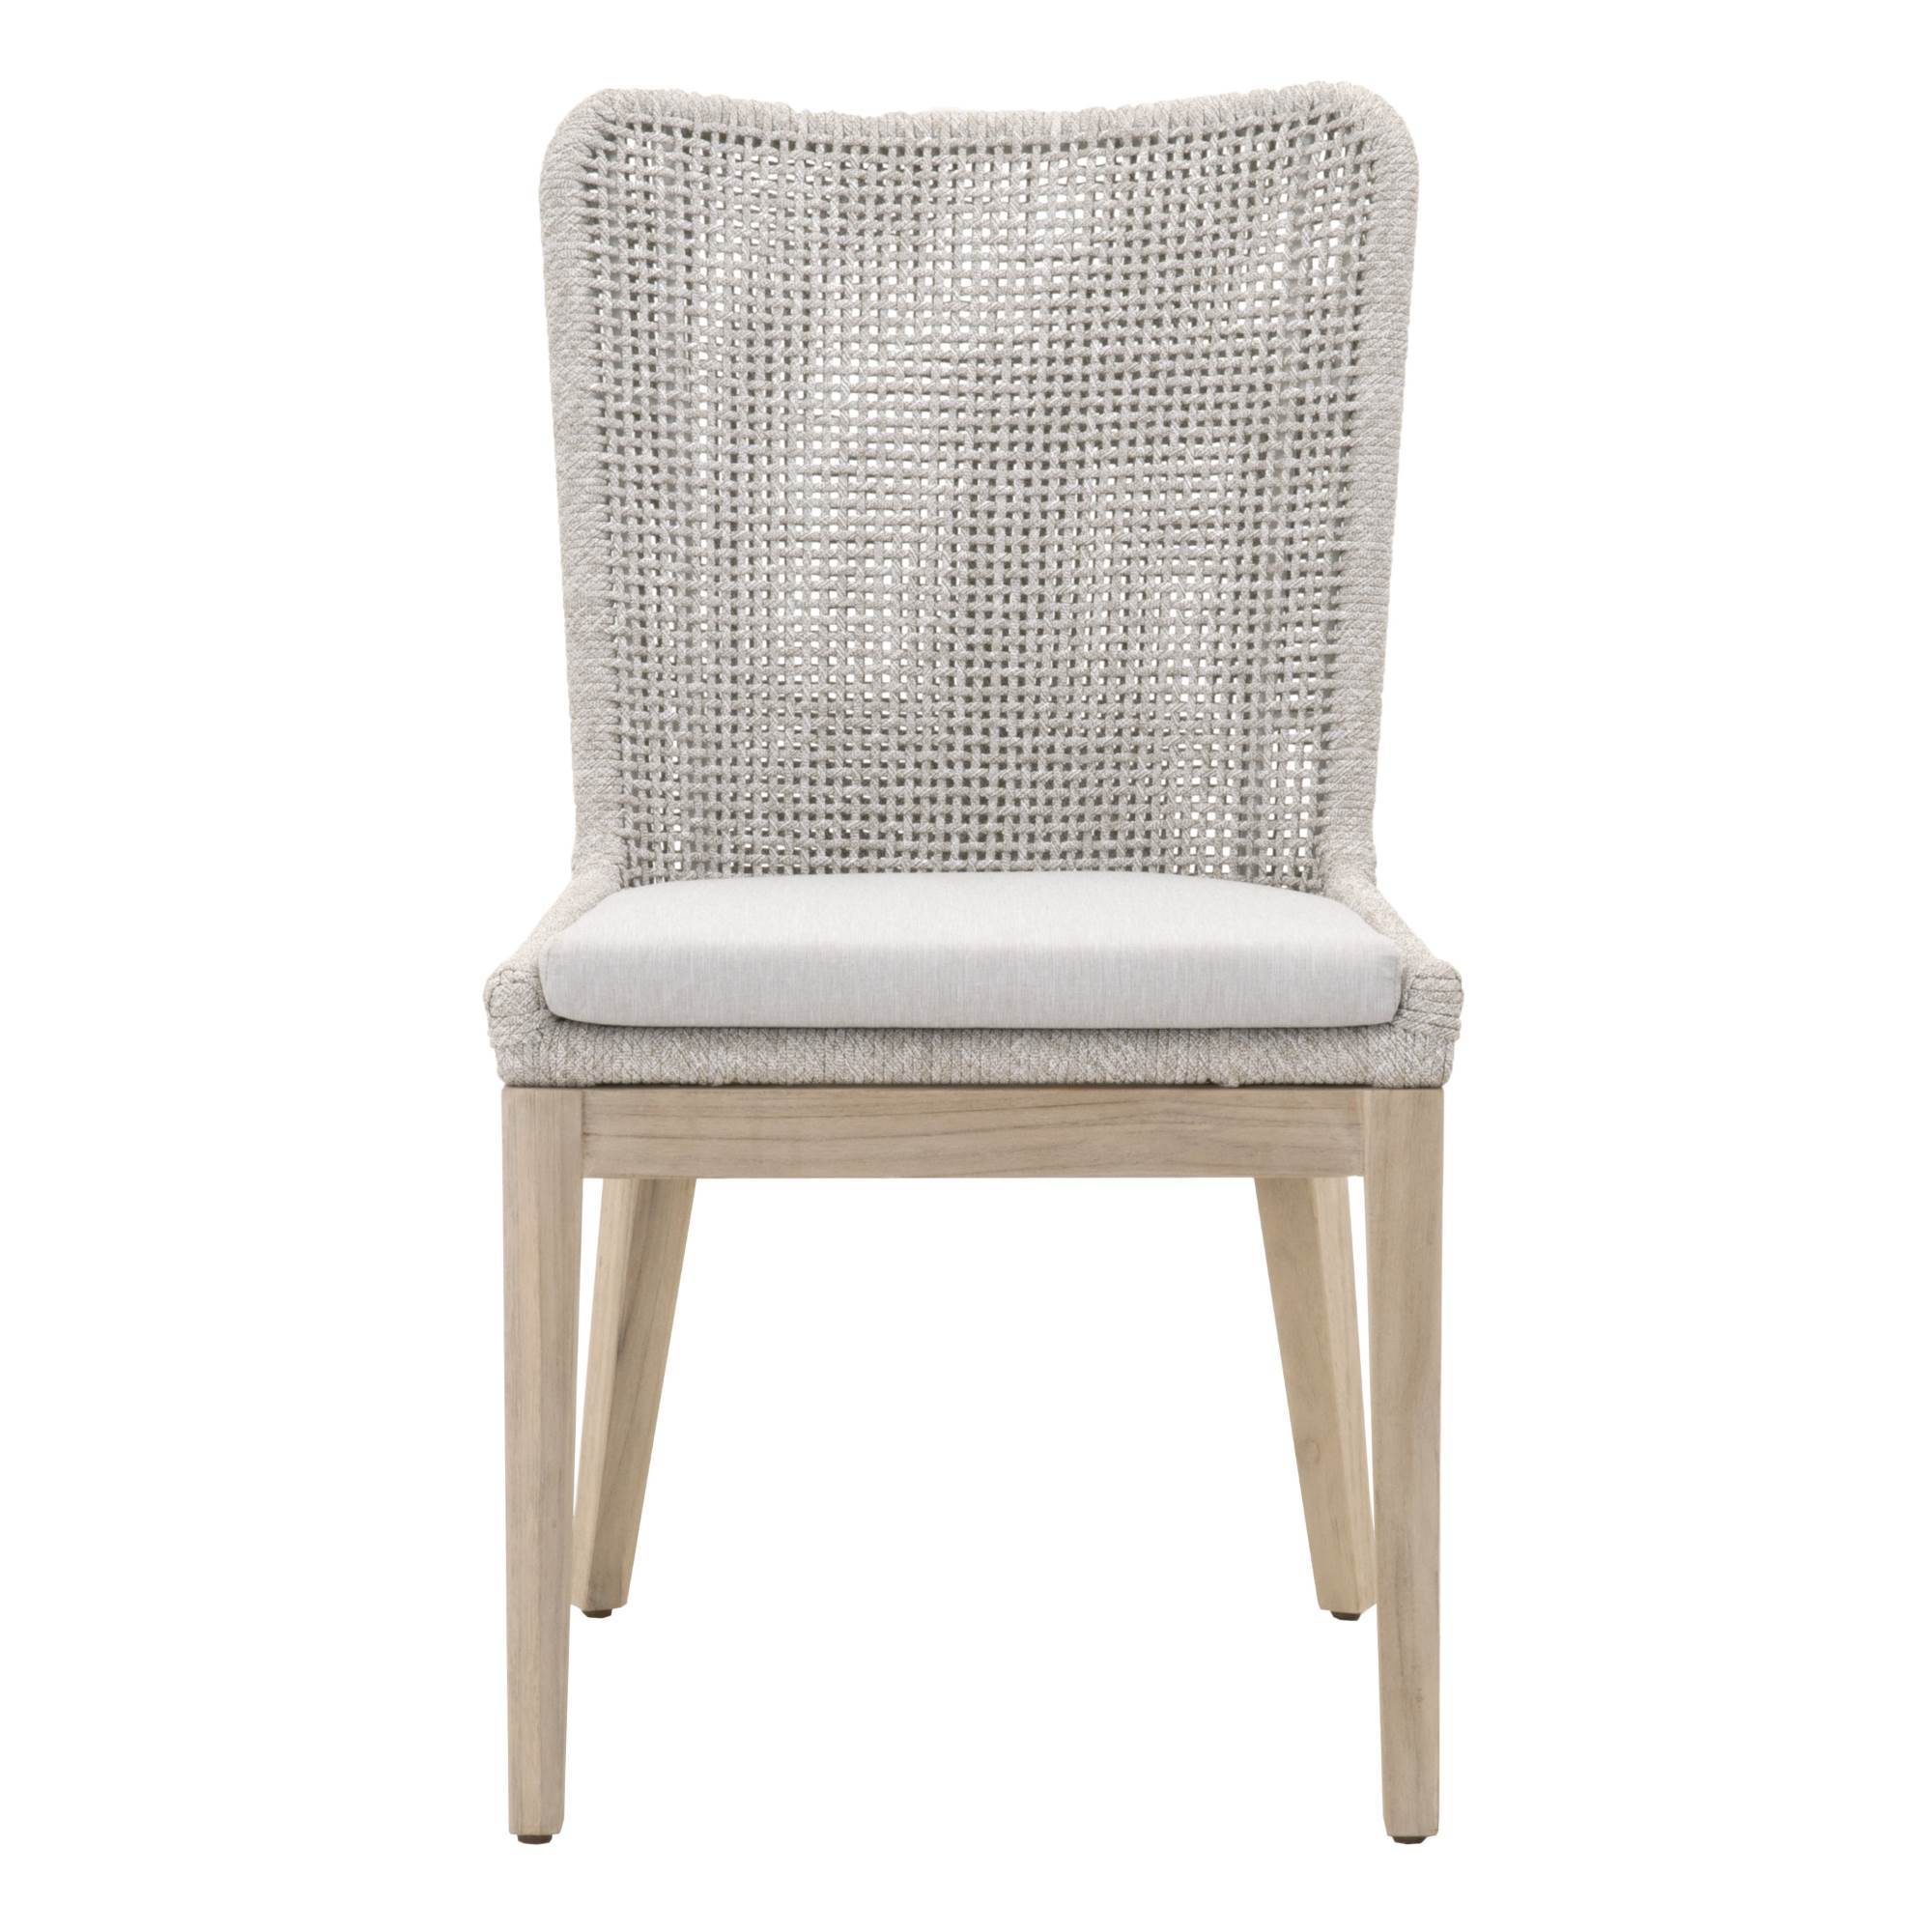 Mesh Outdoor Dining Chair (Set of 2)